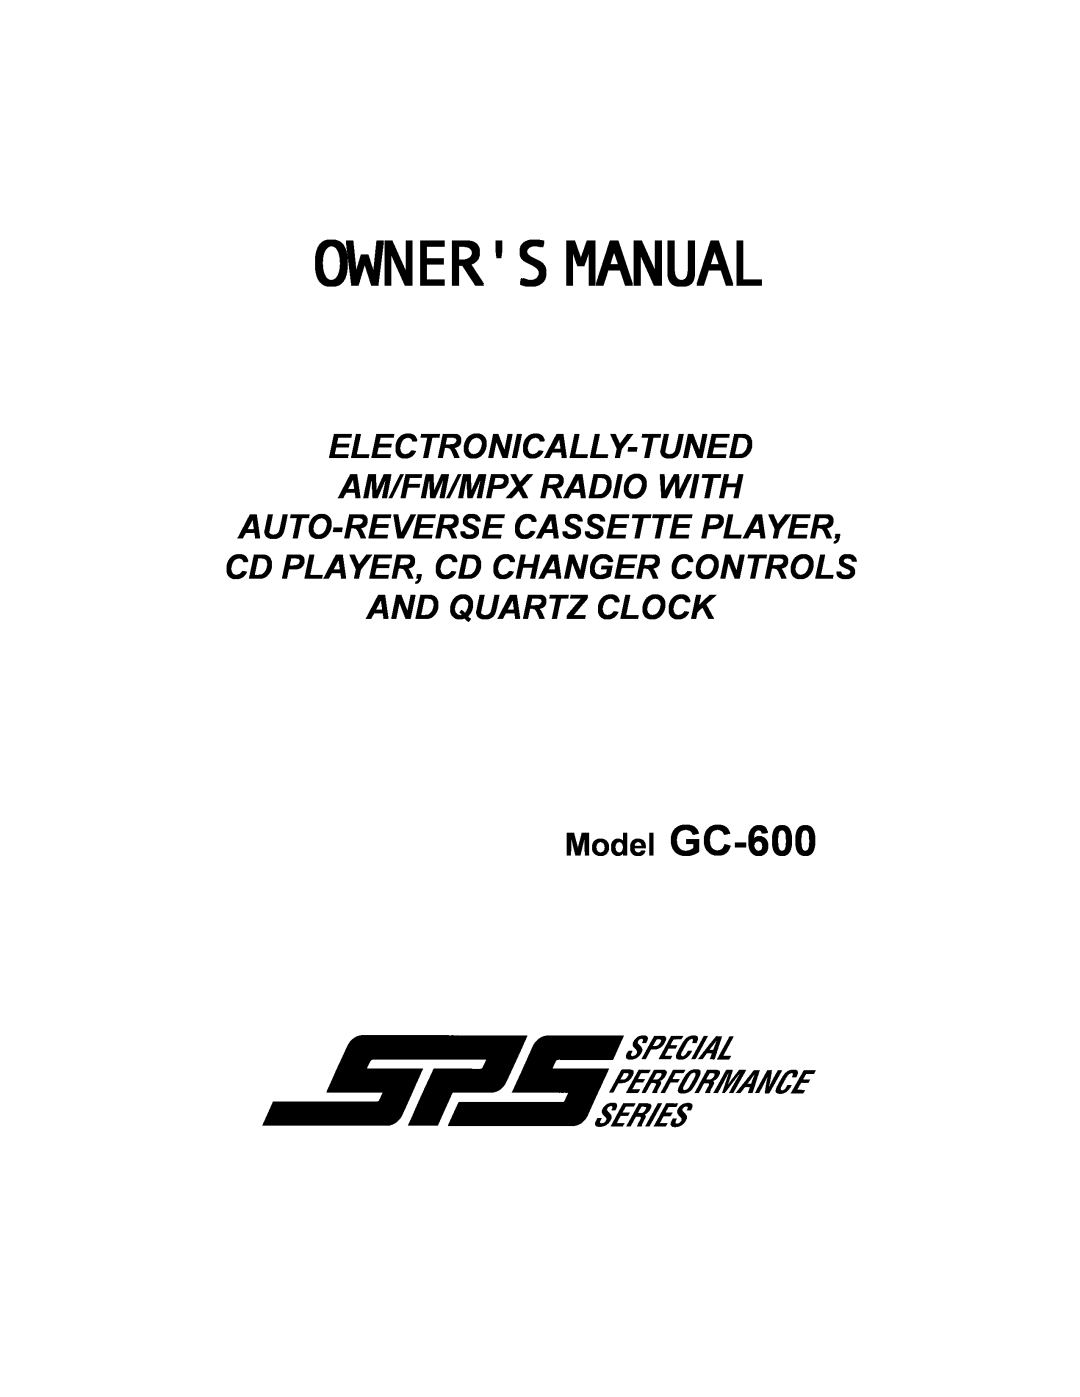 Audiovox AXTM600 owner manual Model GC-600, Ownersmanual, Electronically-Tuned Am/Fm/Mpx Radio With 